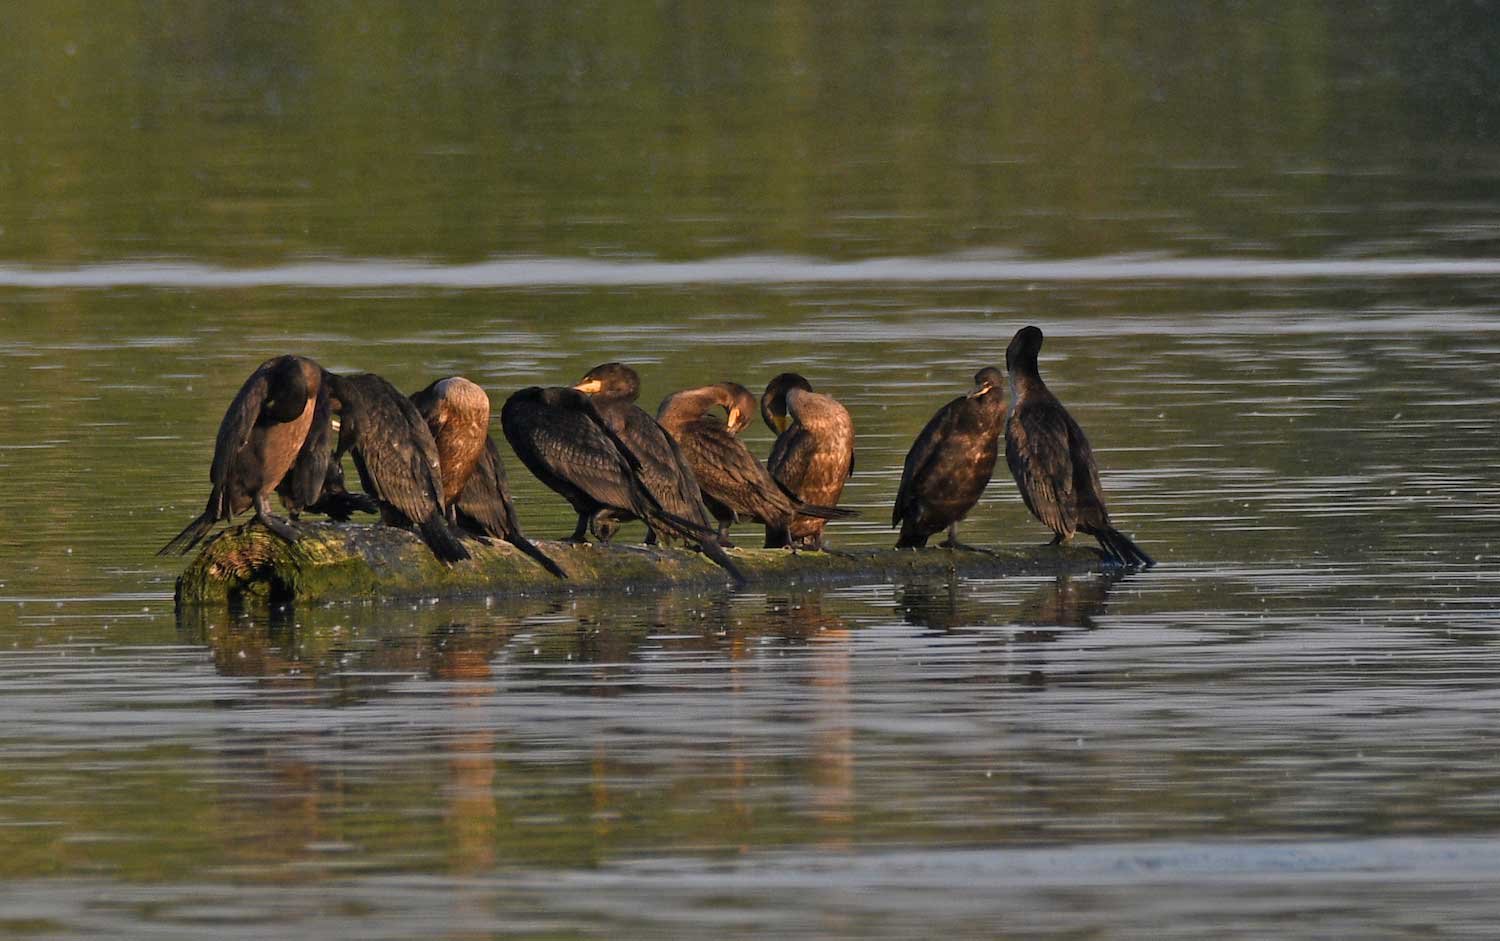 A group of 10 double-crested cormorants perched on a log in the water.